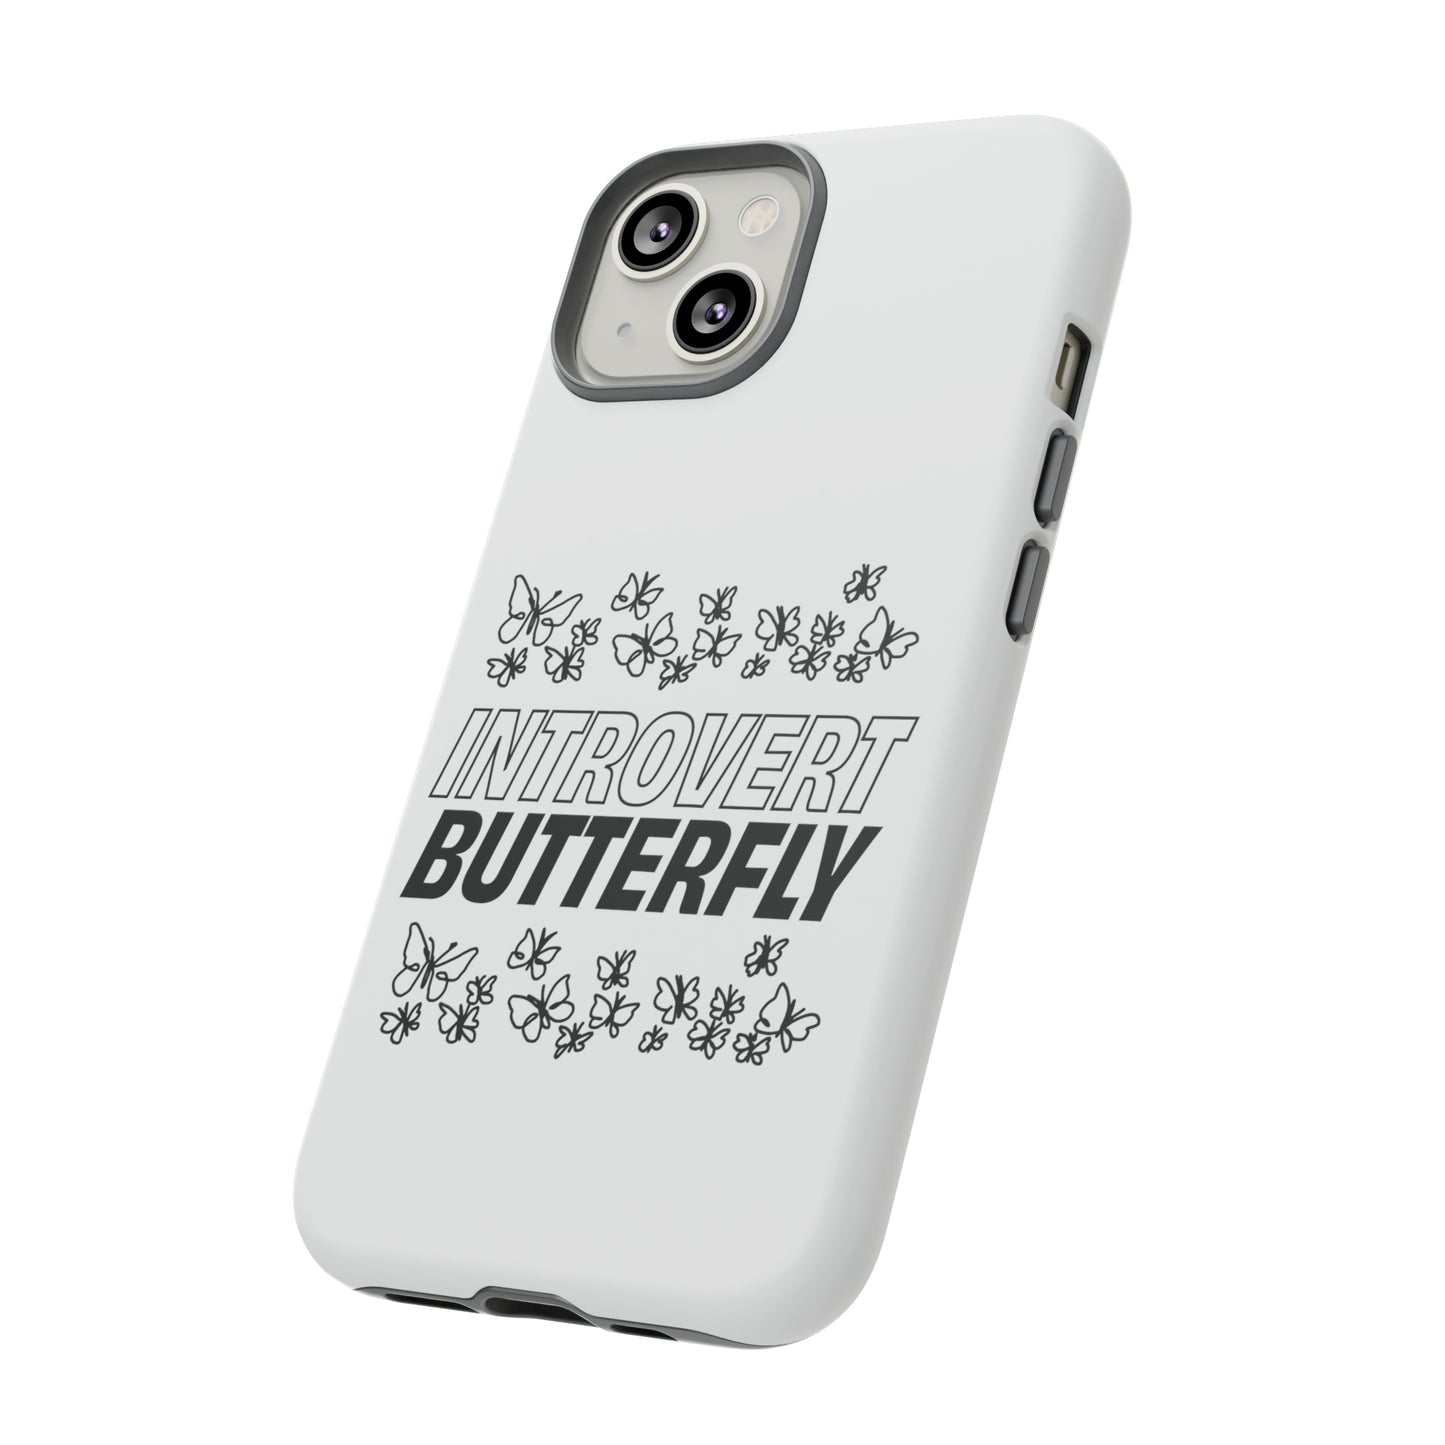 Introvert Butterfly Phone Case